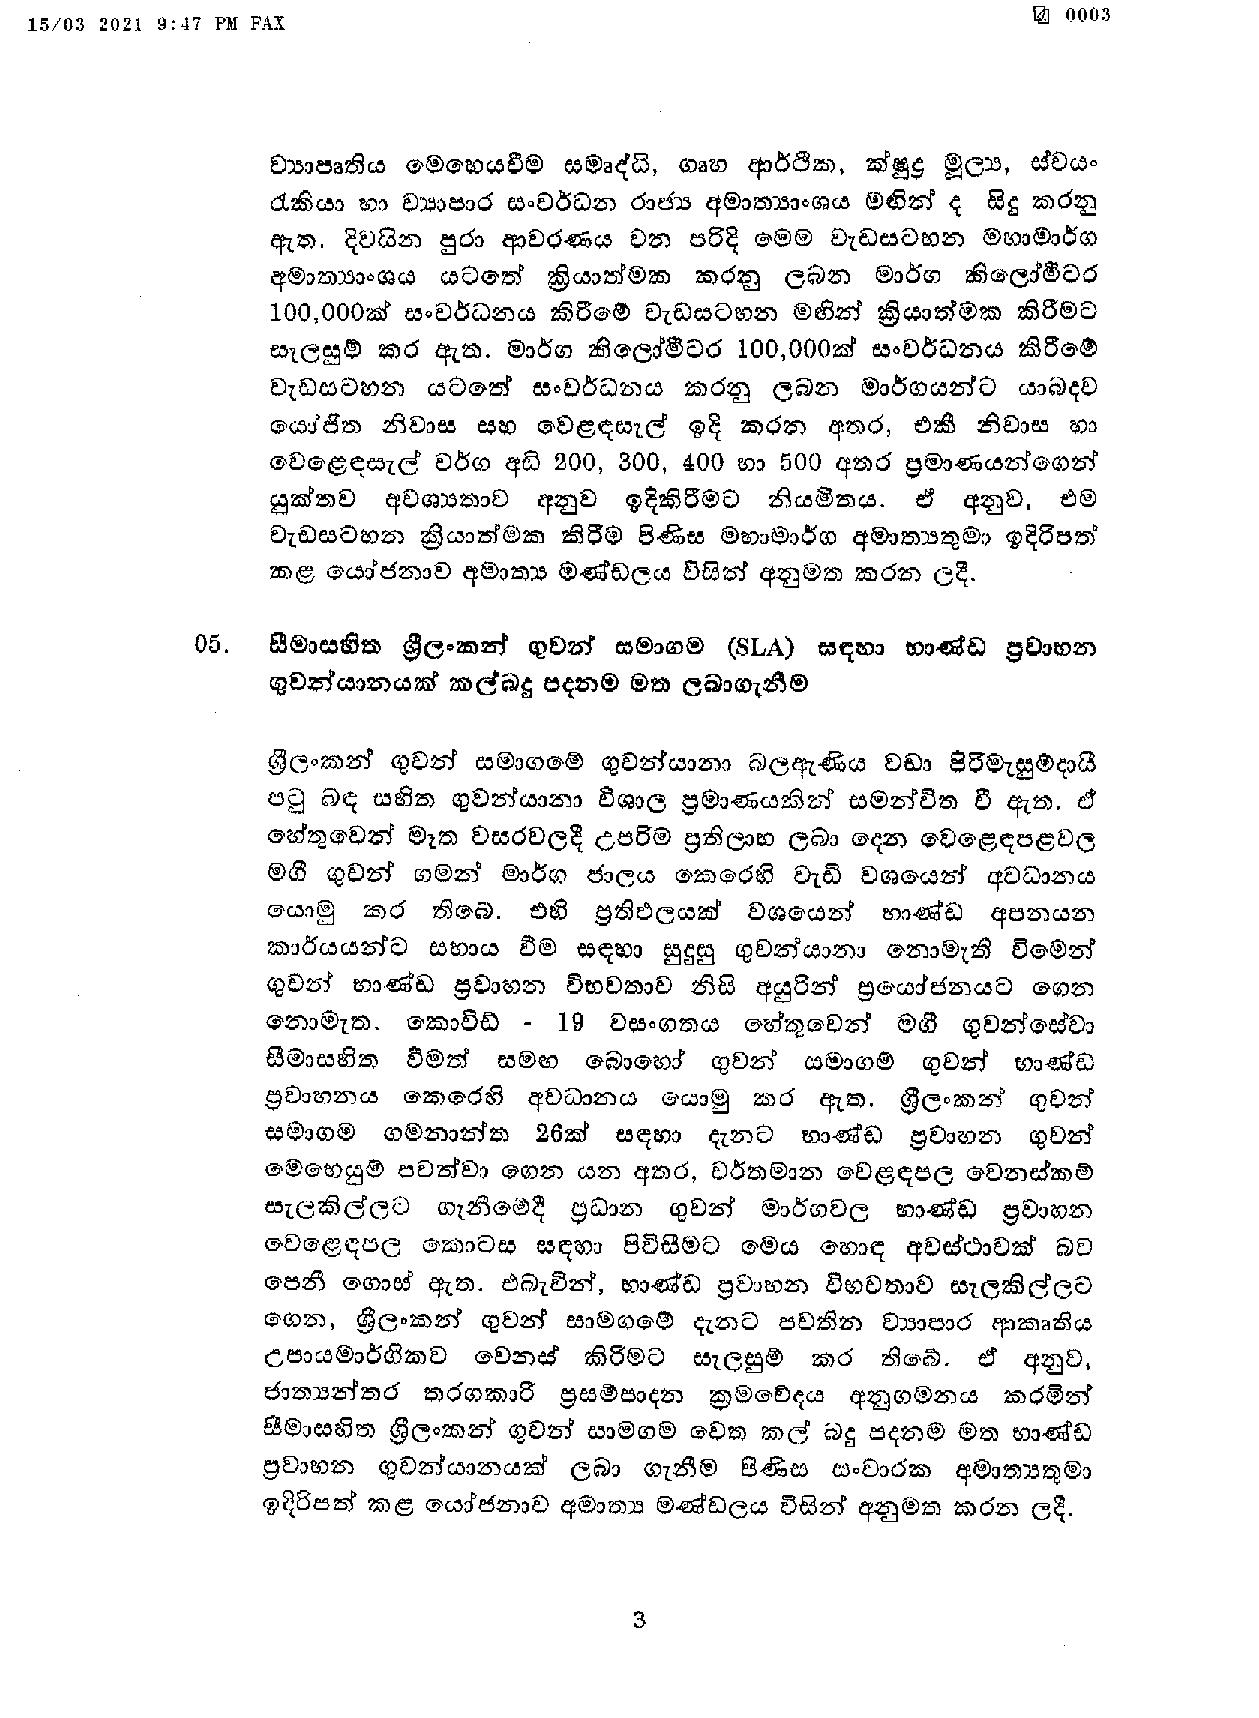 Cabinet Decision on 15.03.2021 page 003